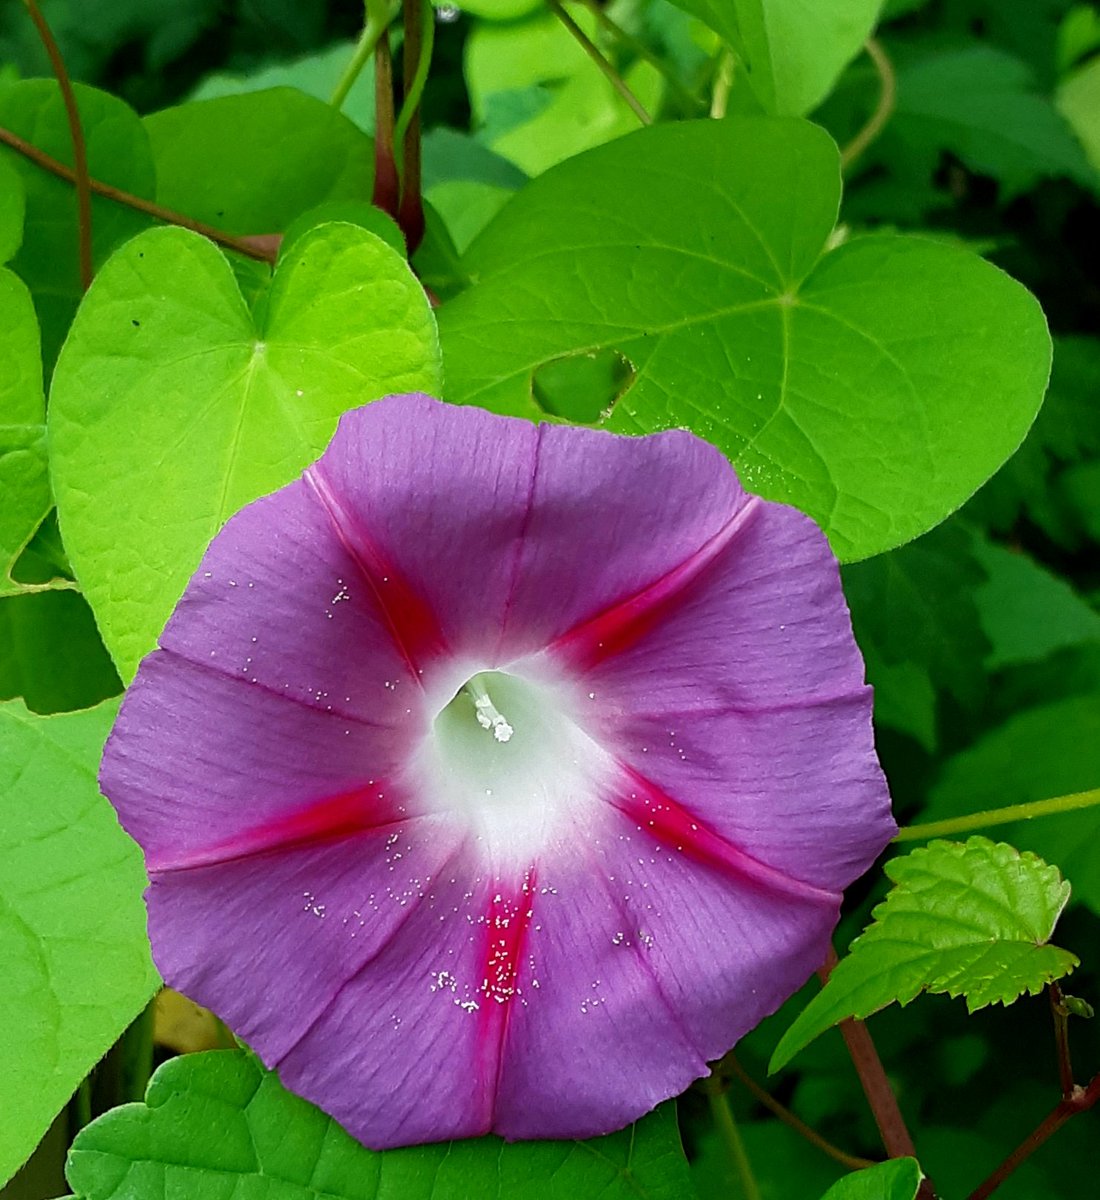 Morning Glories I grew from seed are now blooming in my garden. #flowers #ILoveGardening #gardening #FlowerReport #flowerpower #Flowergarden #flowerphotography 🌺💗⚘🌱🌞